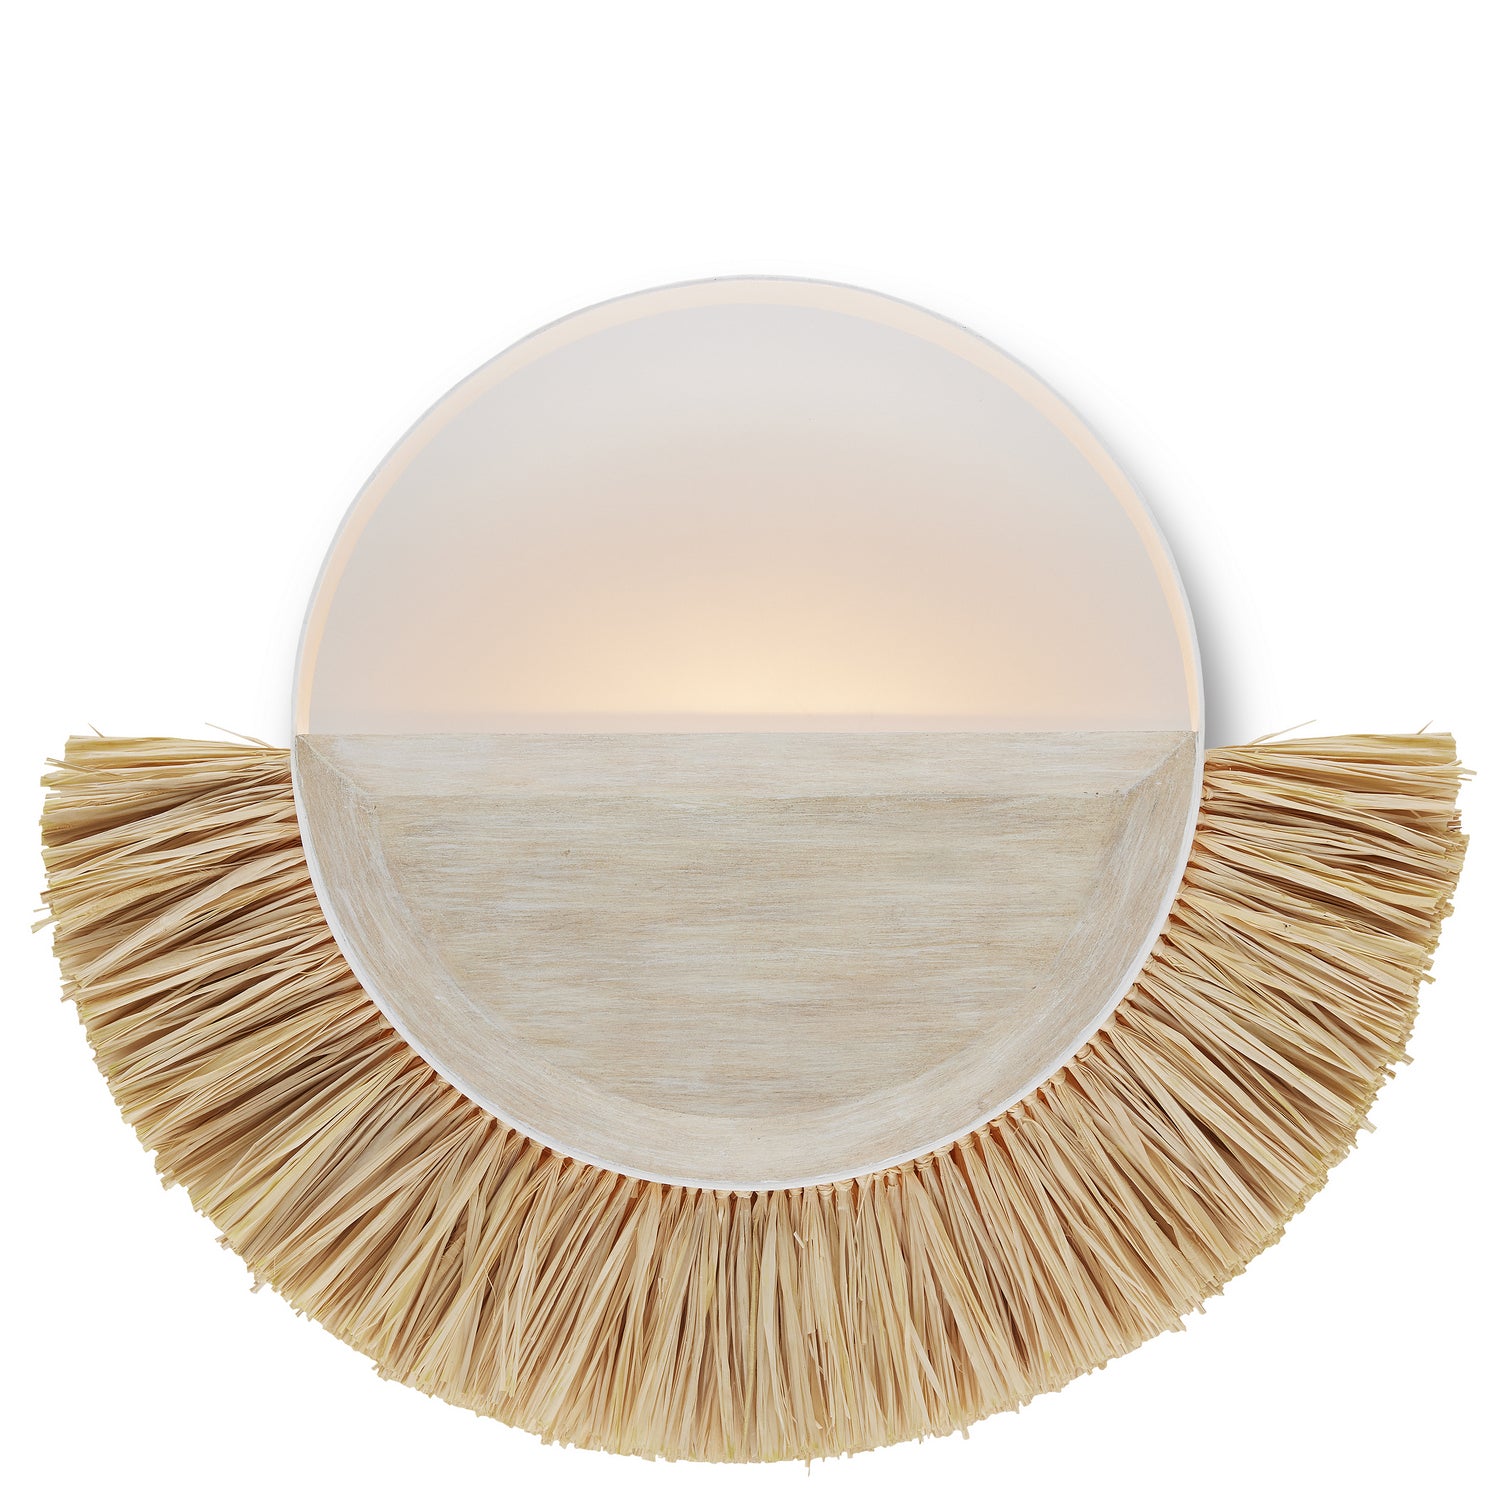 One Light Wall Sconce from the Jamie Beckwith collection in Sugar White/Sandstone/Natural finish